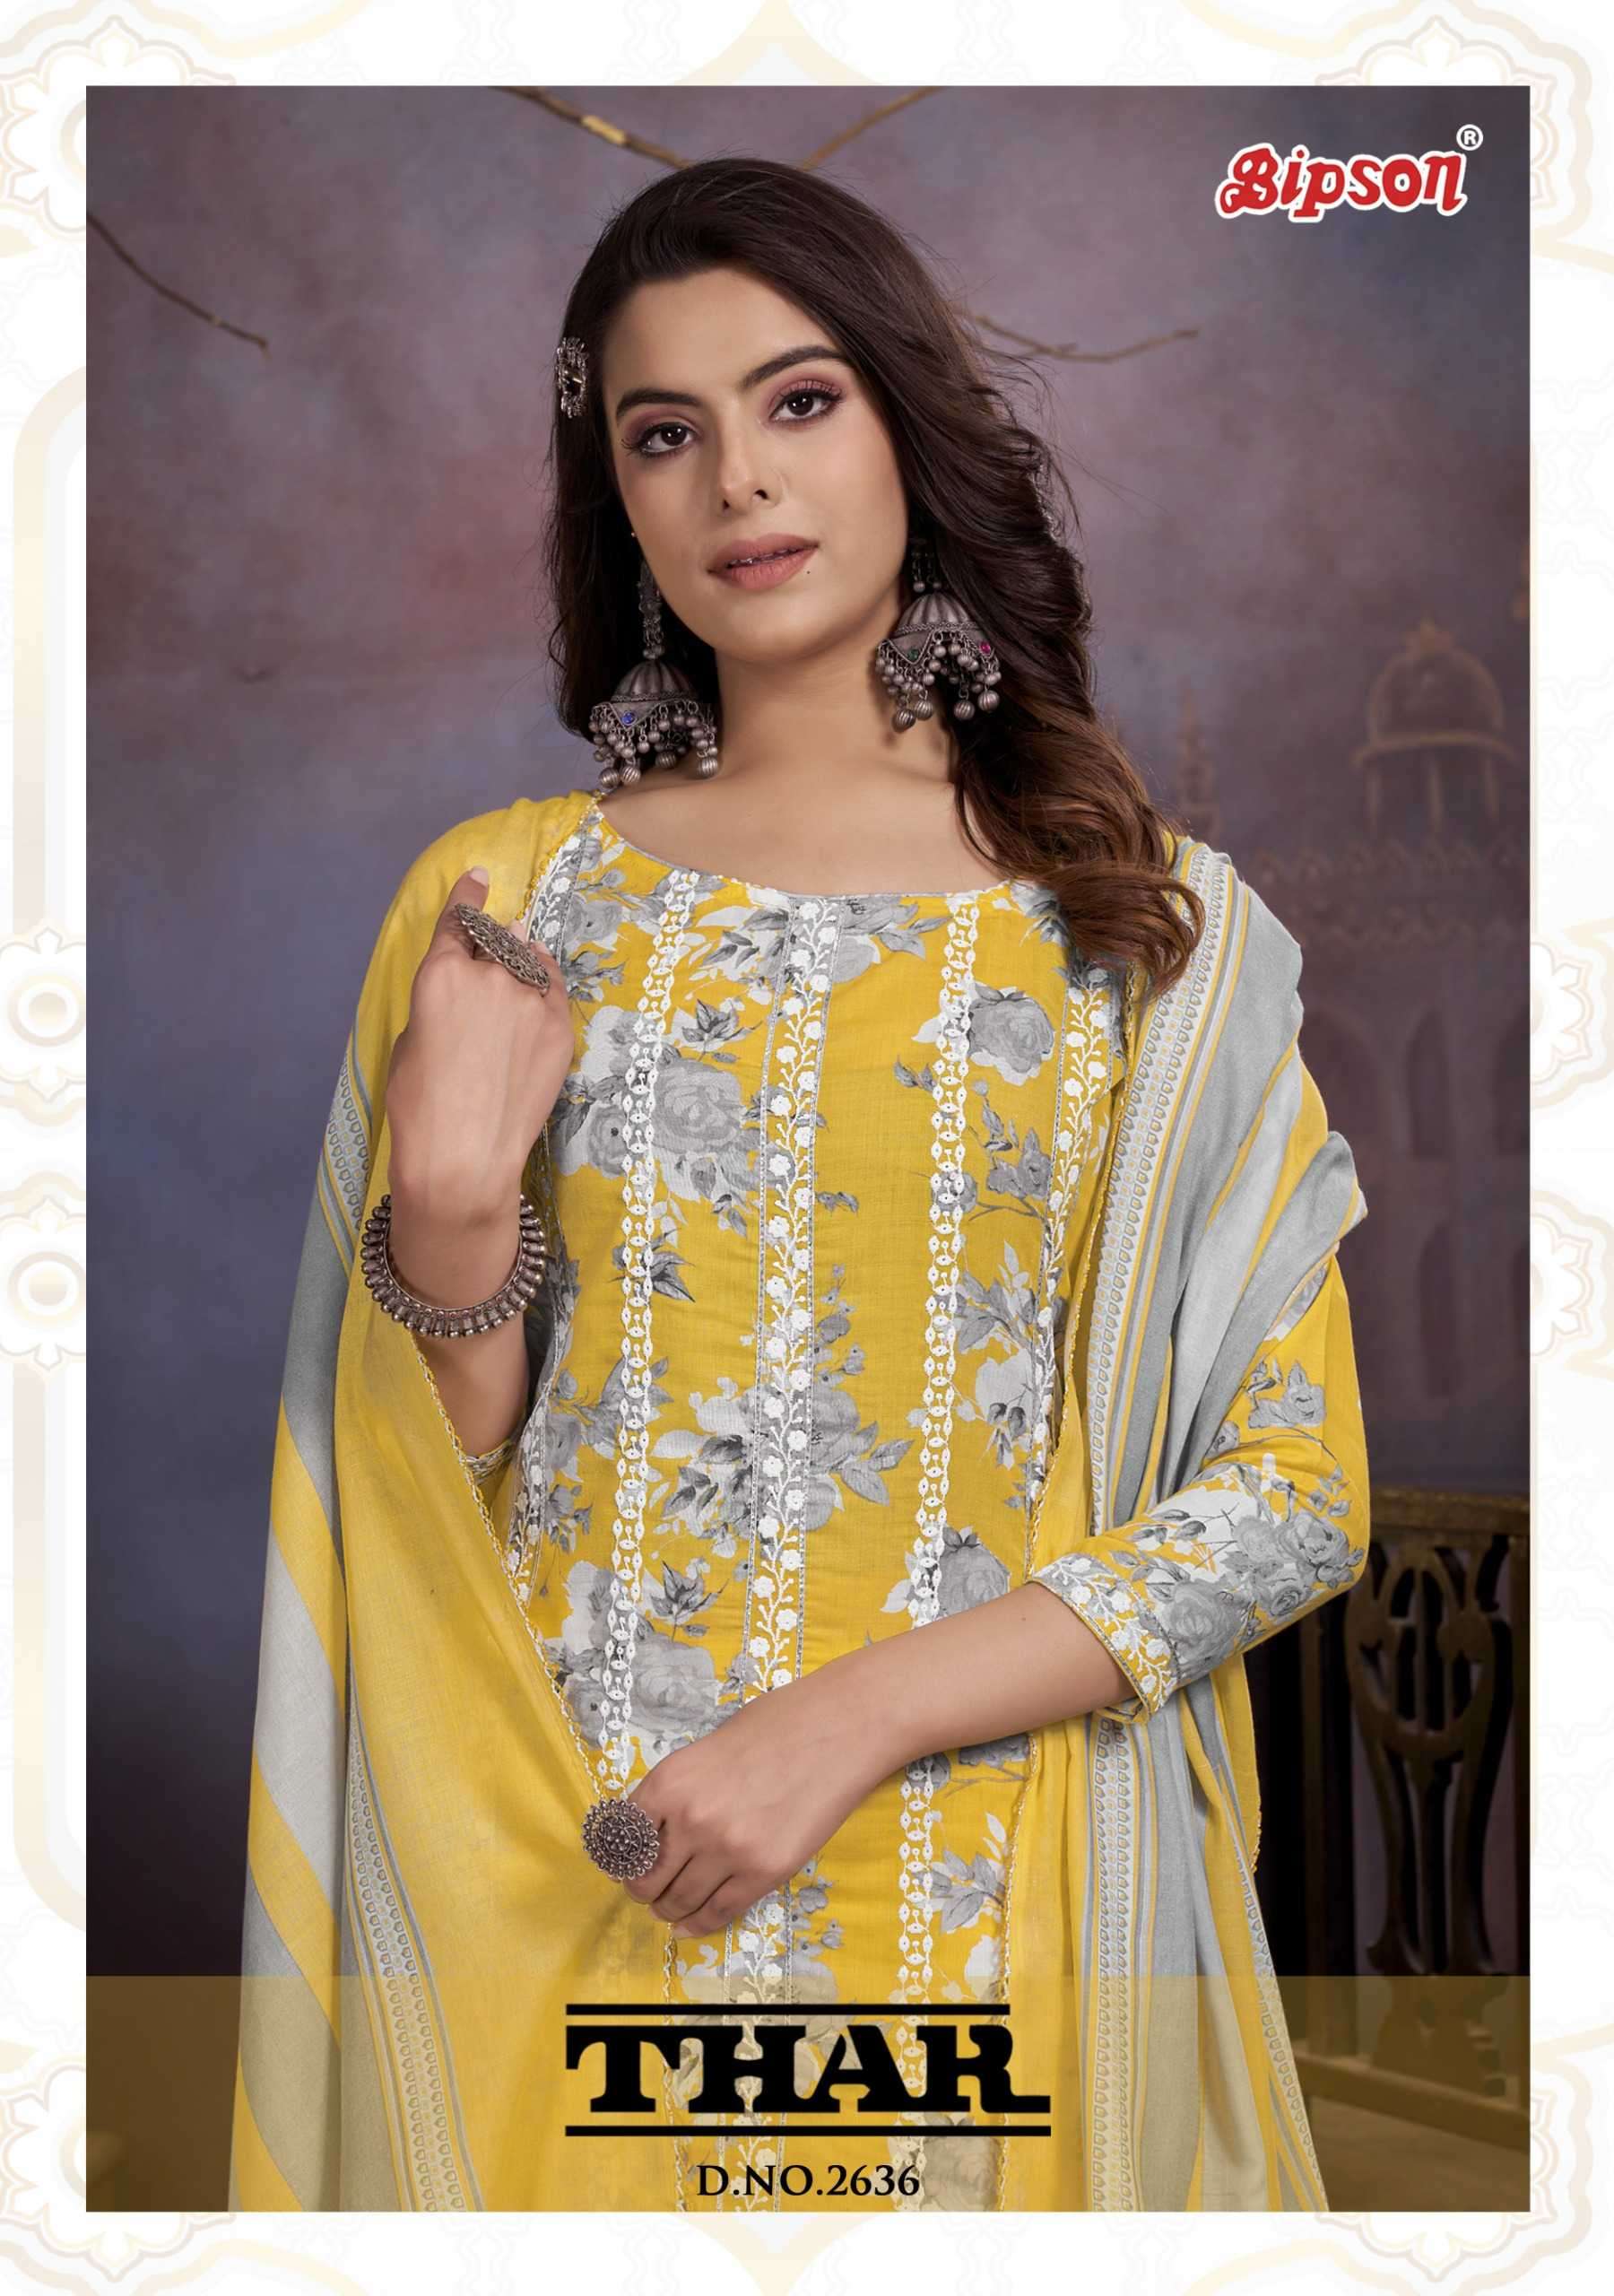 bipson thar 2636 Pure Cotton Print With White Thread Embroidery Work suit